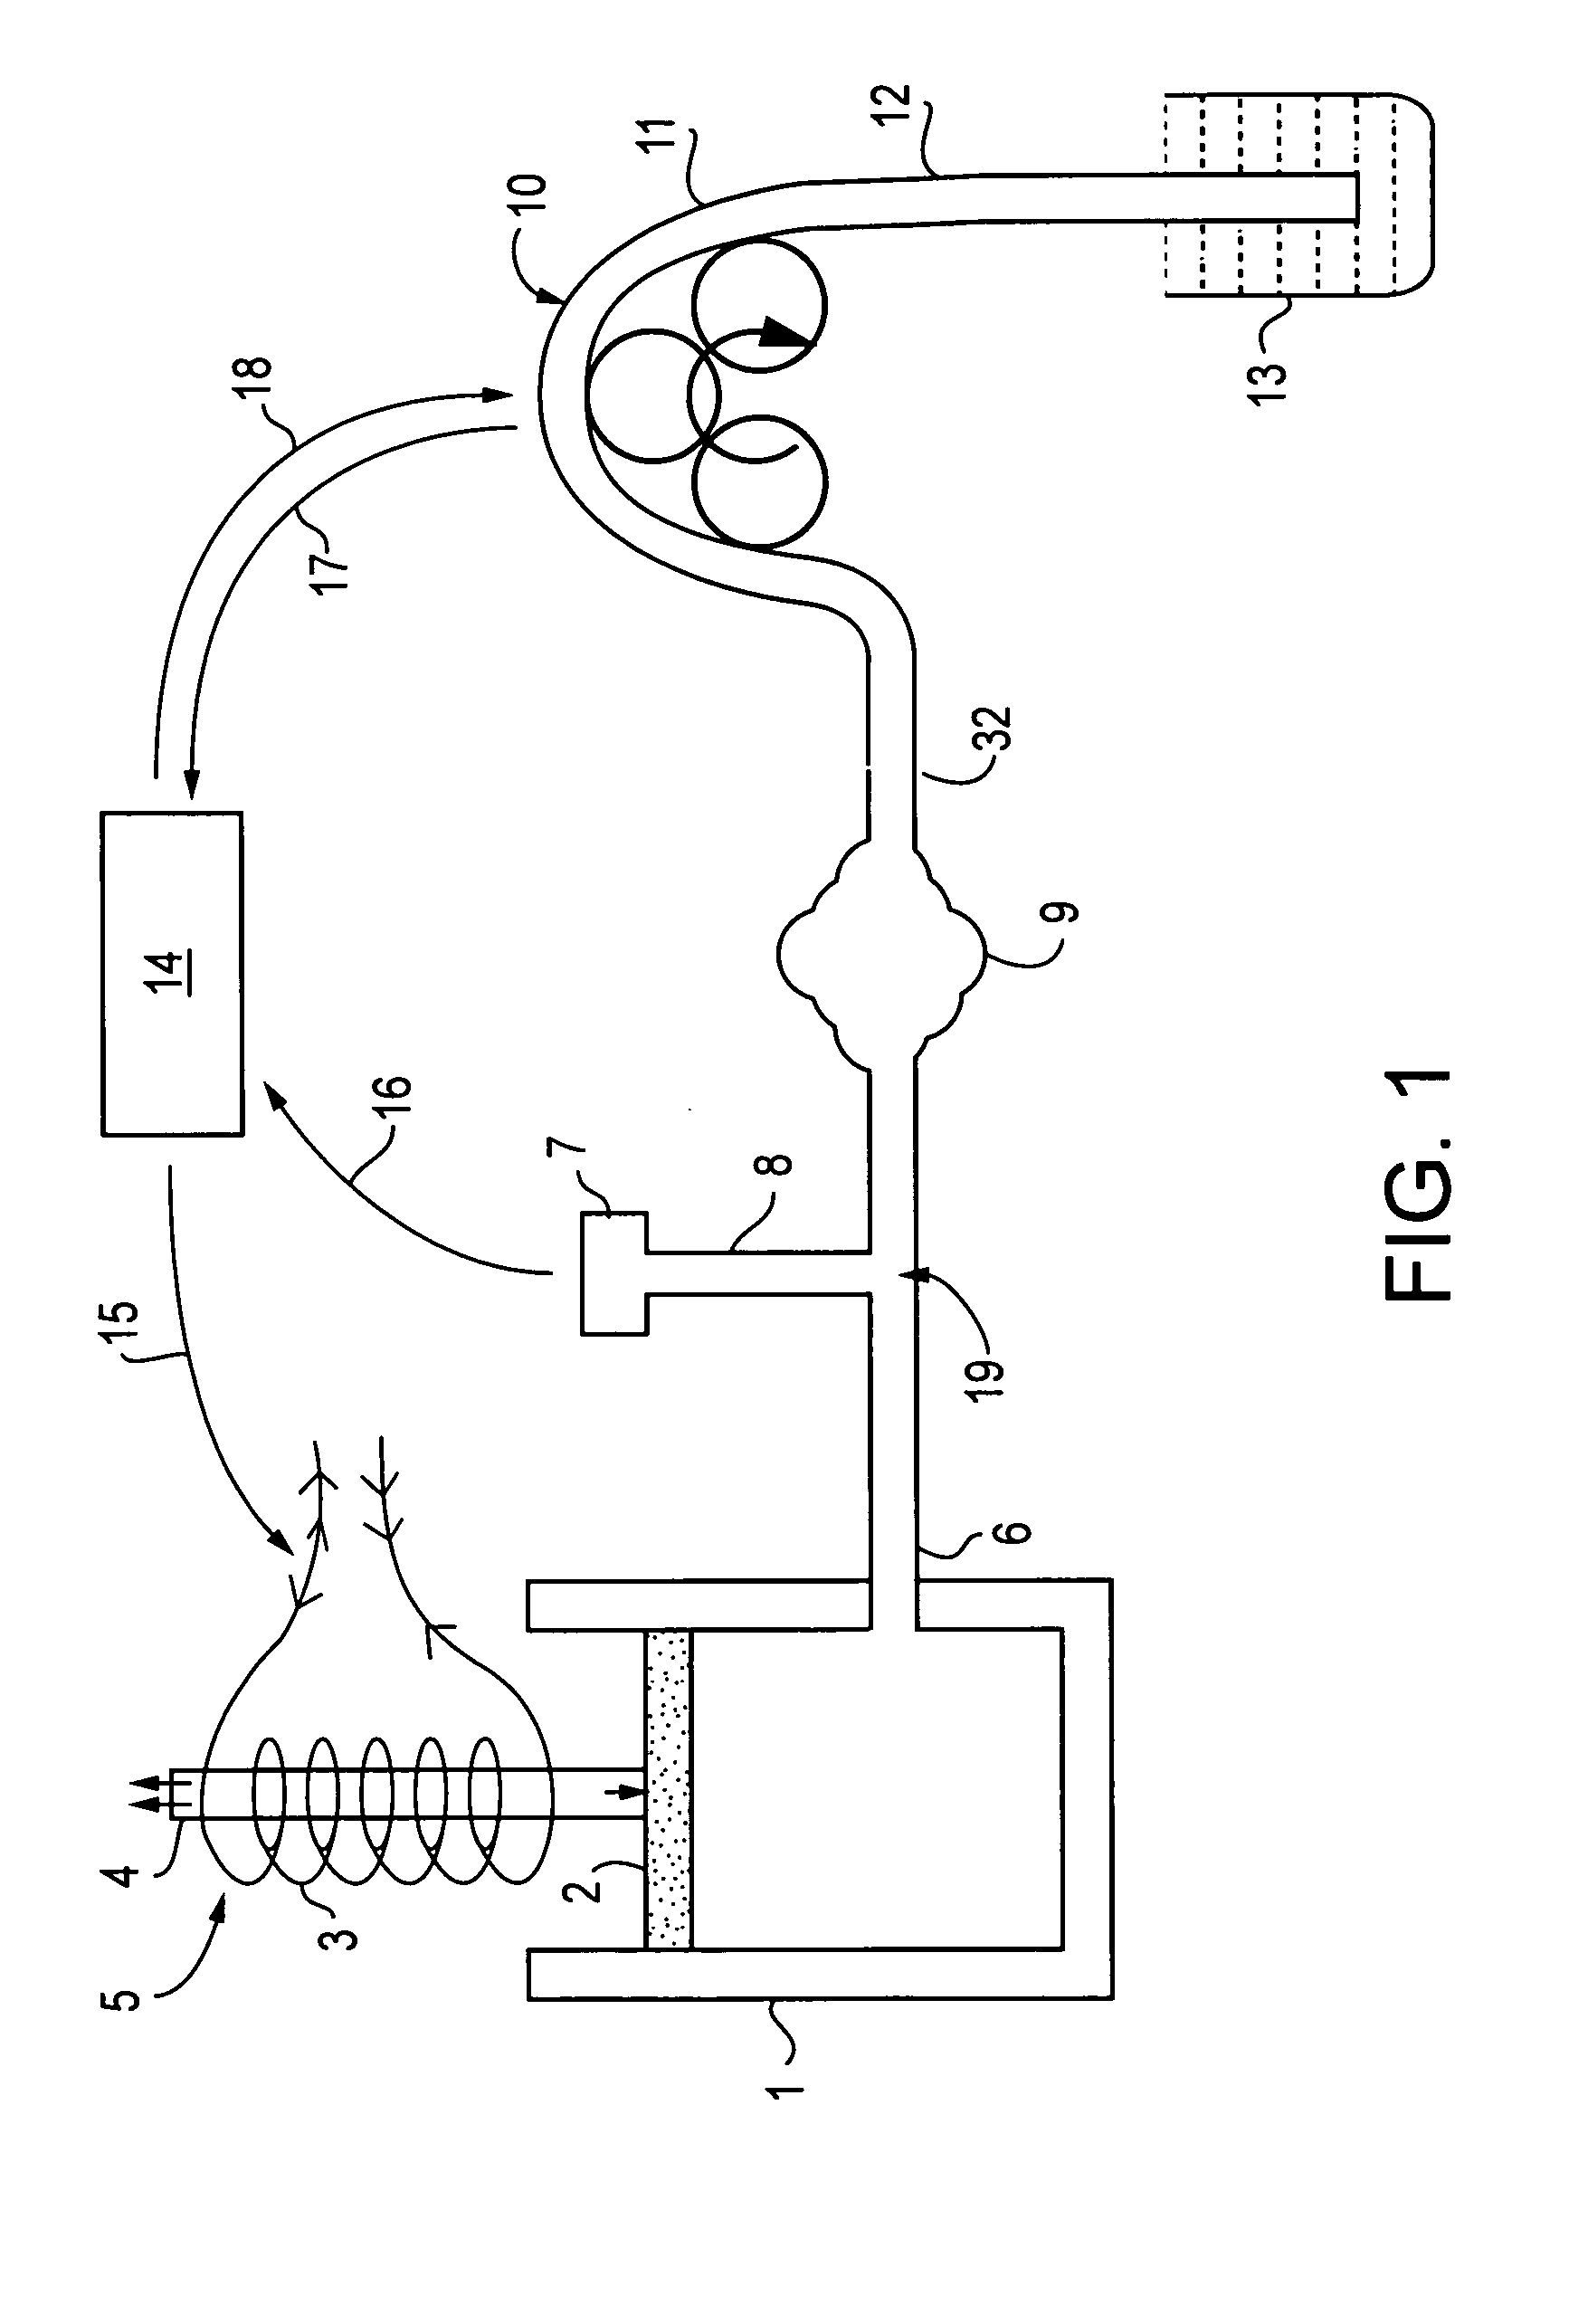 Electromagnetically controlled tissue cavity distending system